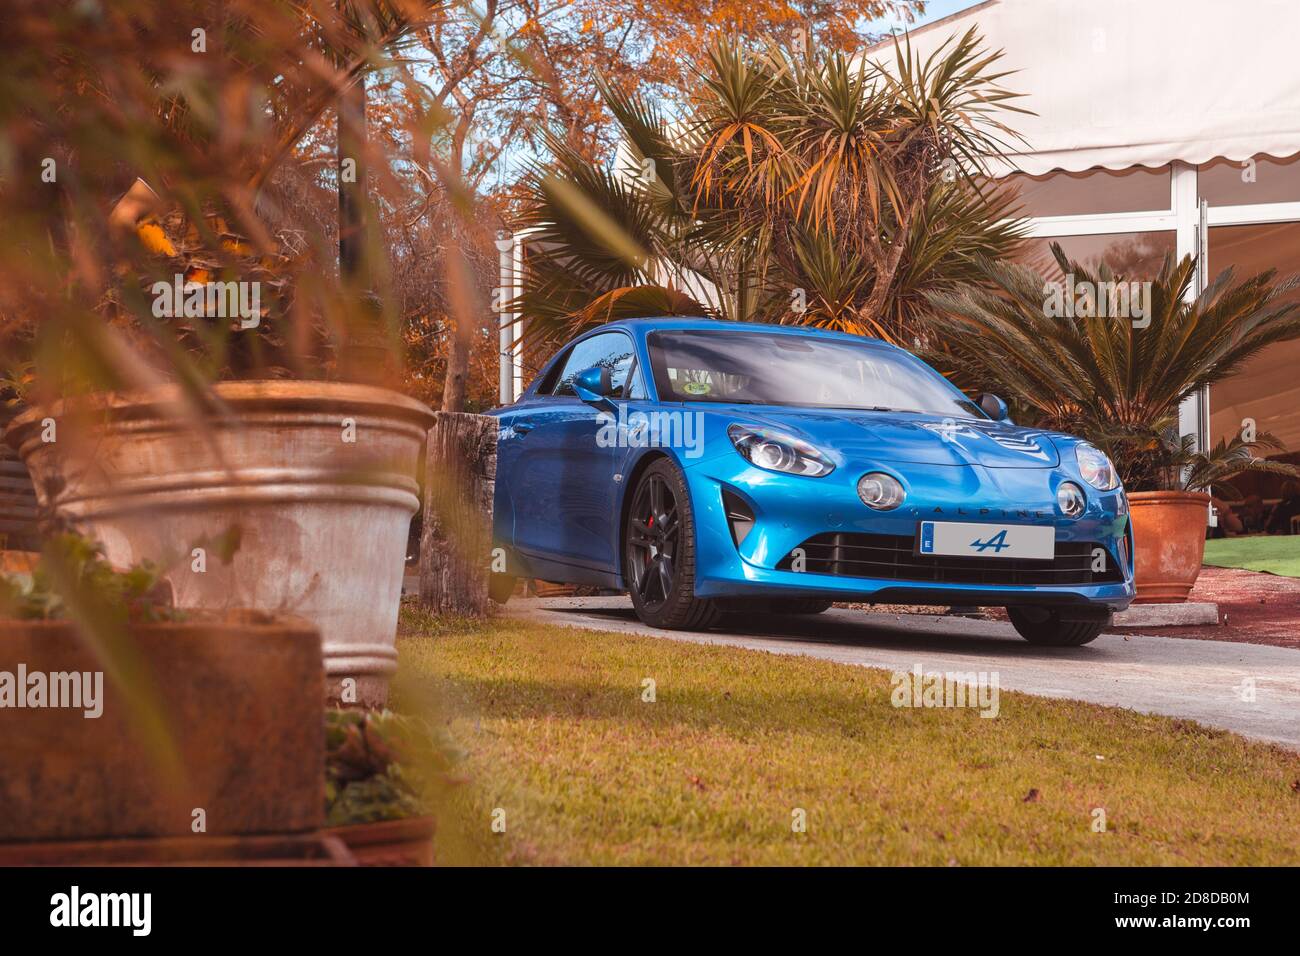 Vallines, Cantabria, Spain - October 23, 2020: Blue Alpine A110  2019 edition parked during an exhibition of super sports vehicles organized in Cantab Stock Photo